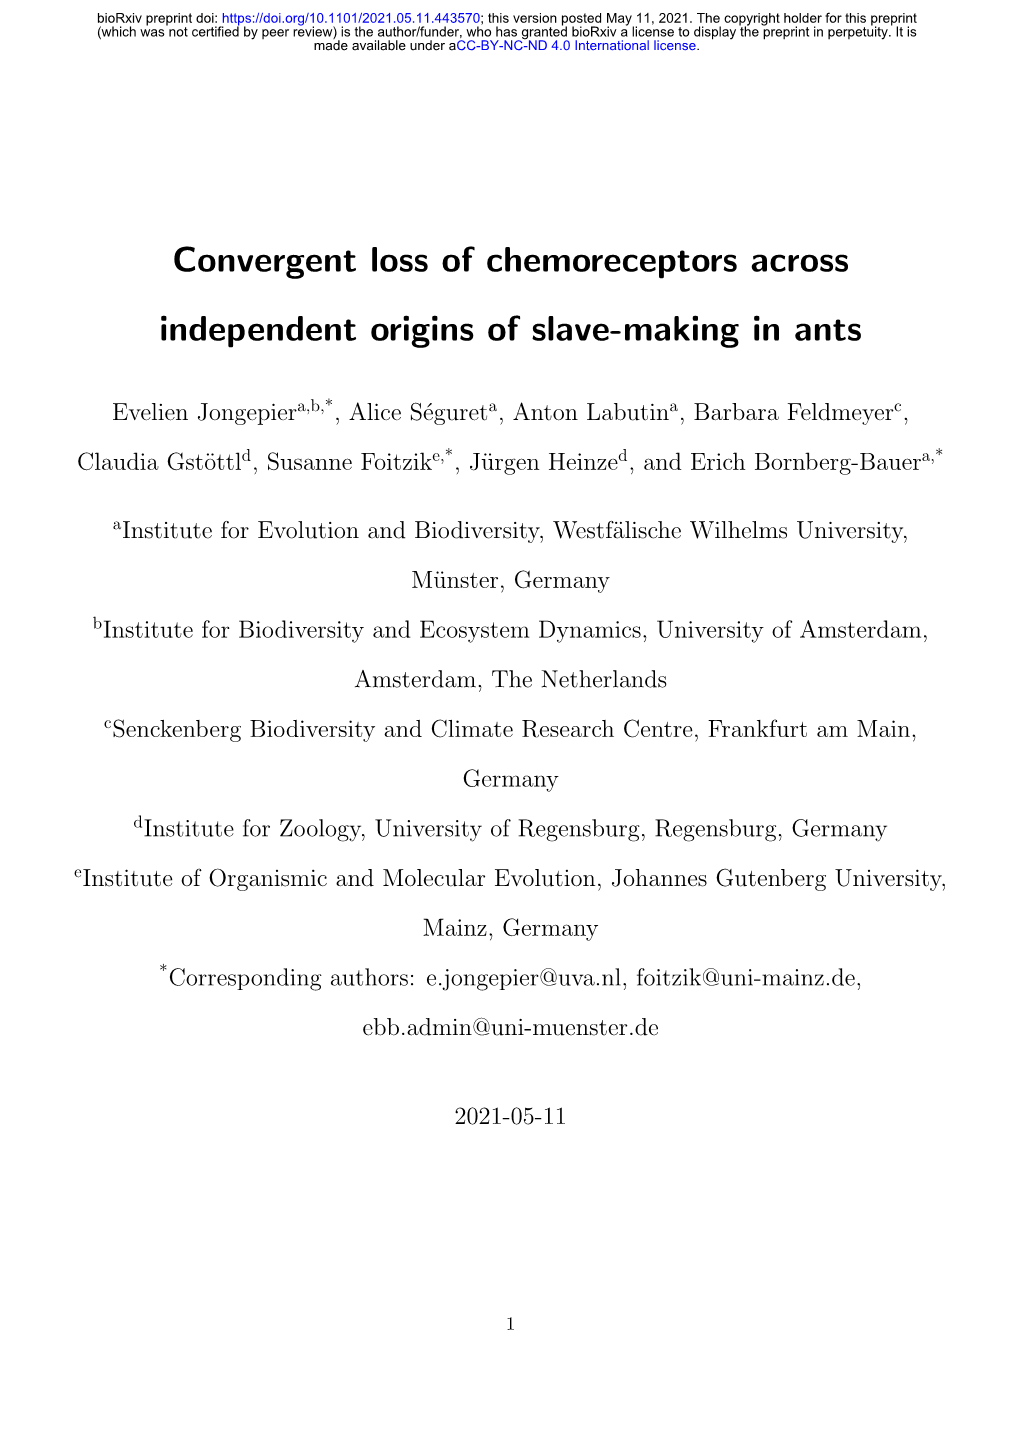 Convergent Loss of Chemoreceptors Across Independent Origins of Slave-Making in Ants